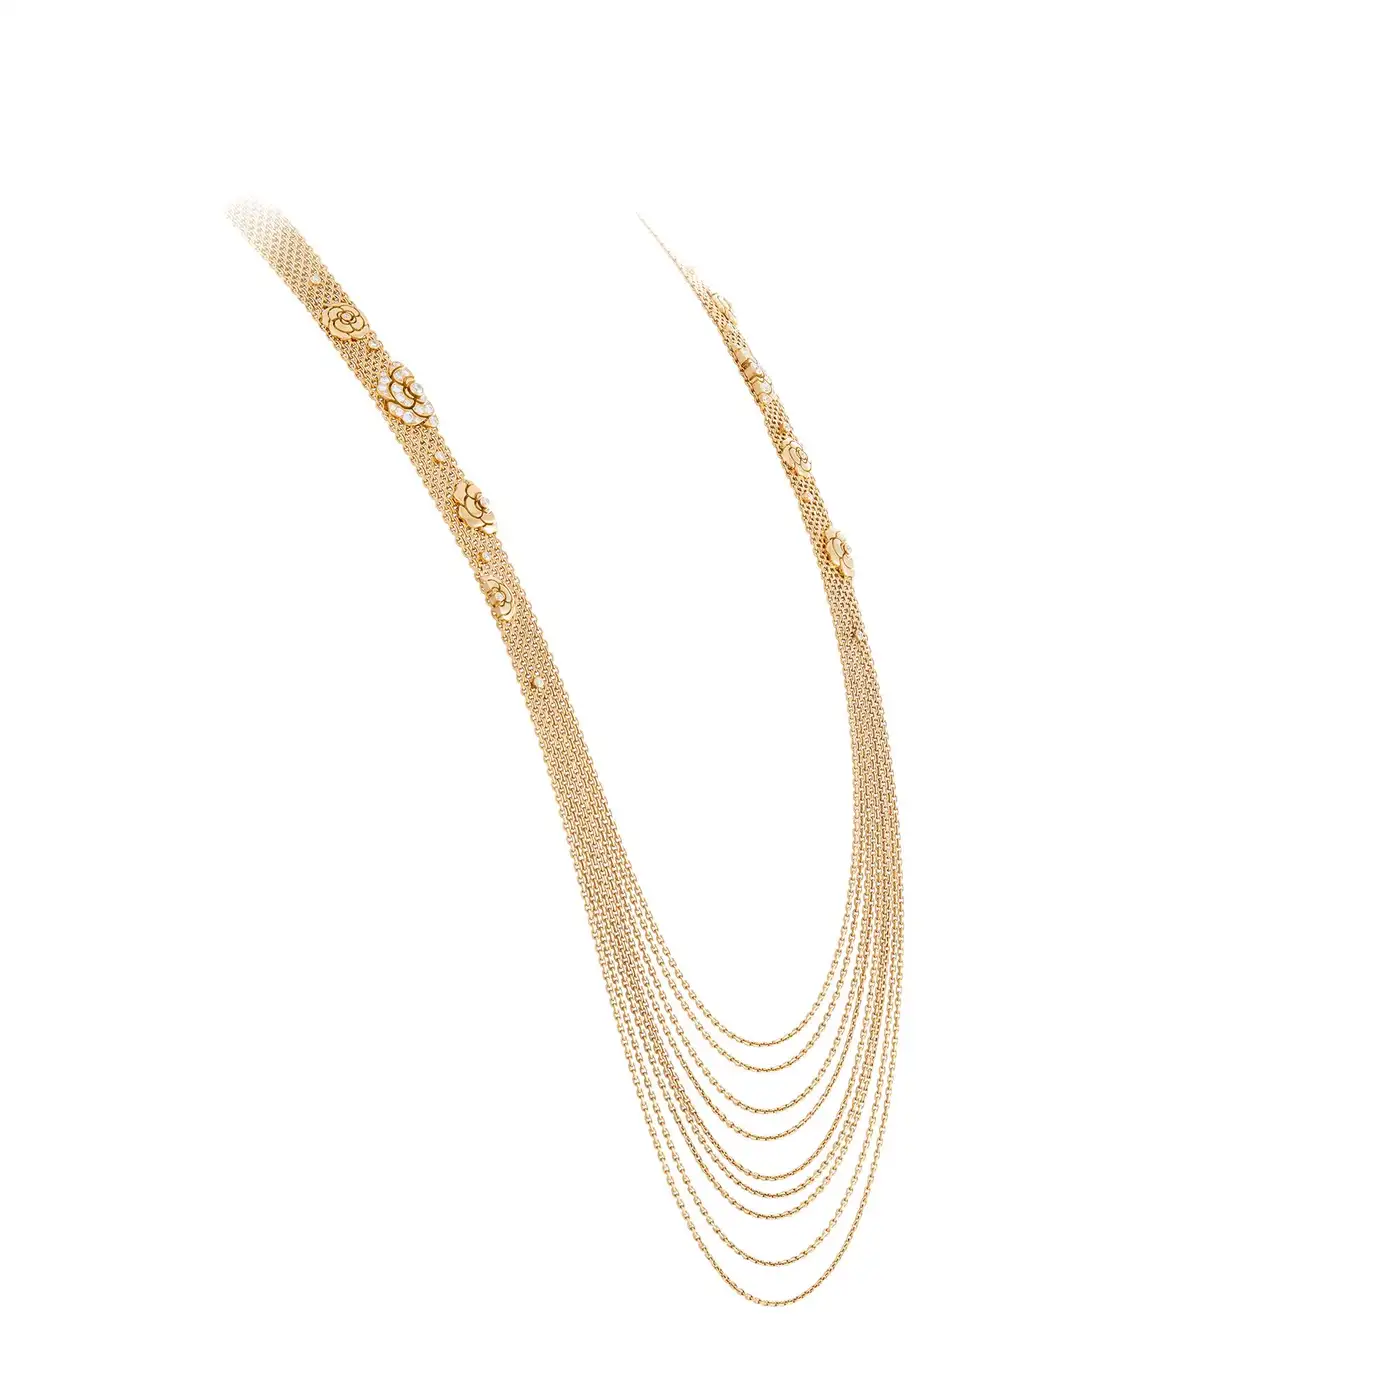 Chanel-Gold-and-Diamond-Camellia-Multi-Strand-Flapper-Necklace-6.webp